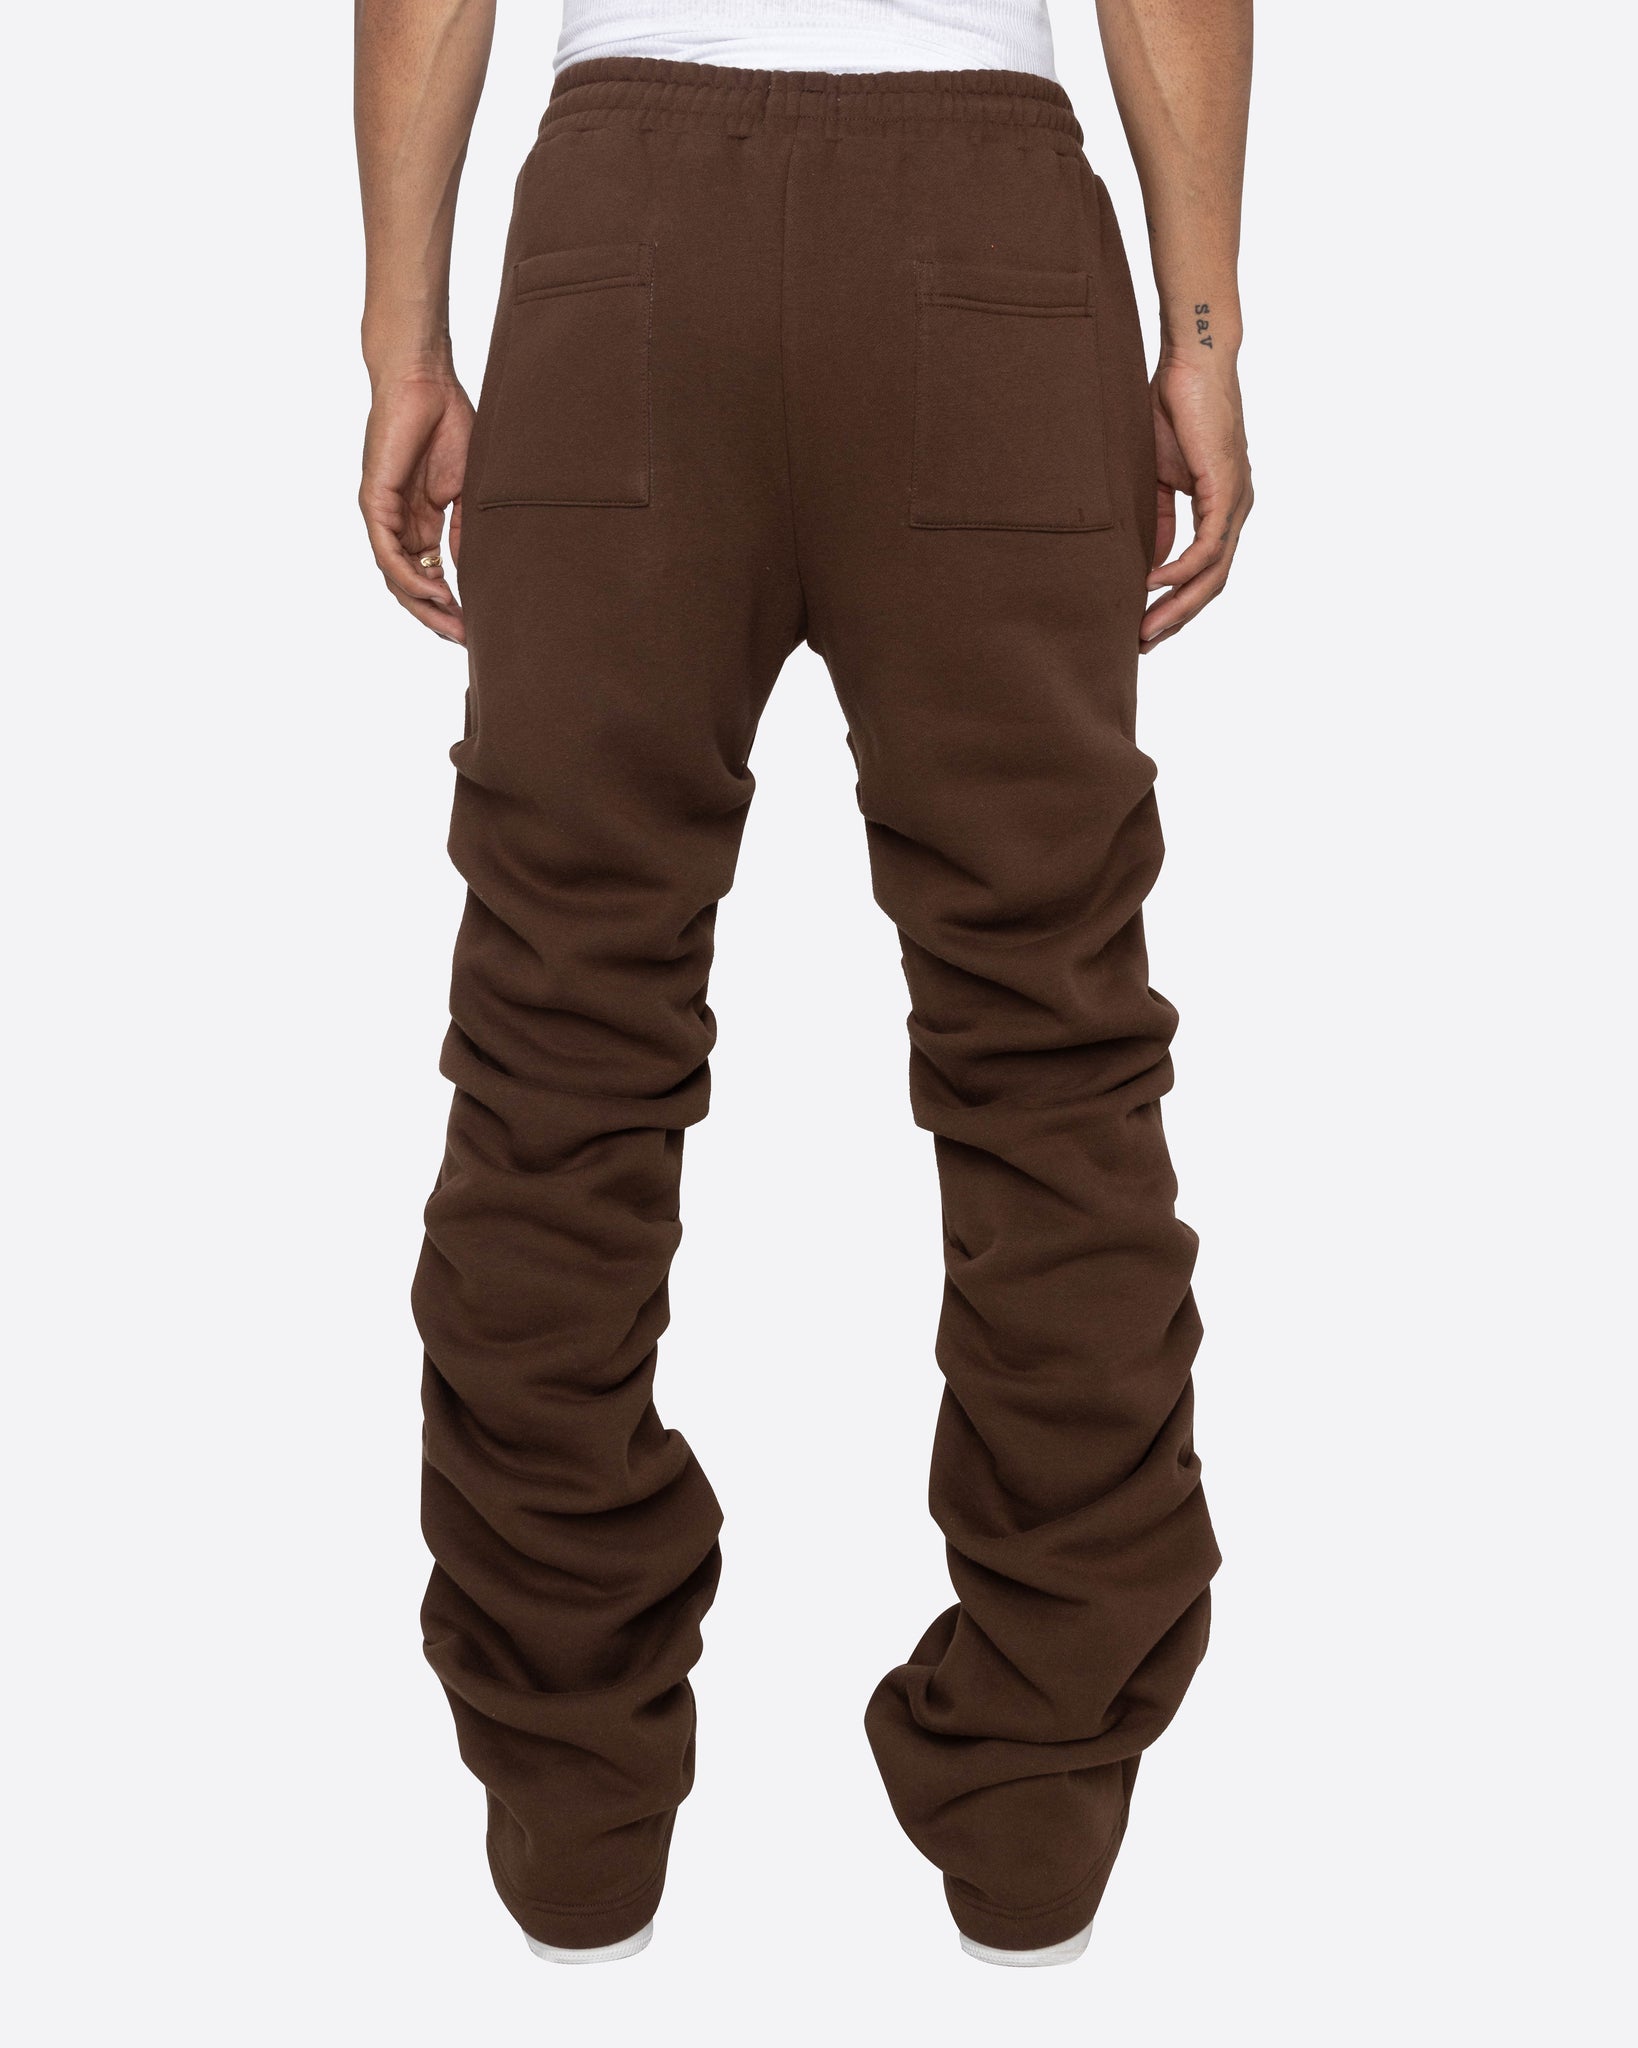 EPTM STACKED SWEATPANTS-BROWN